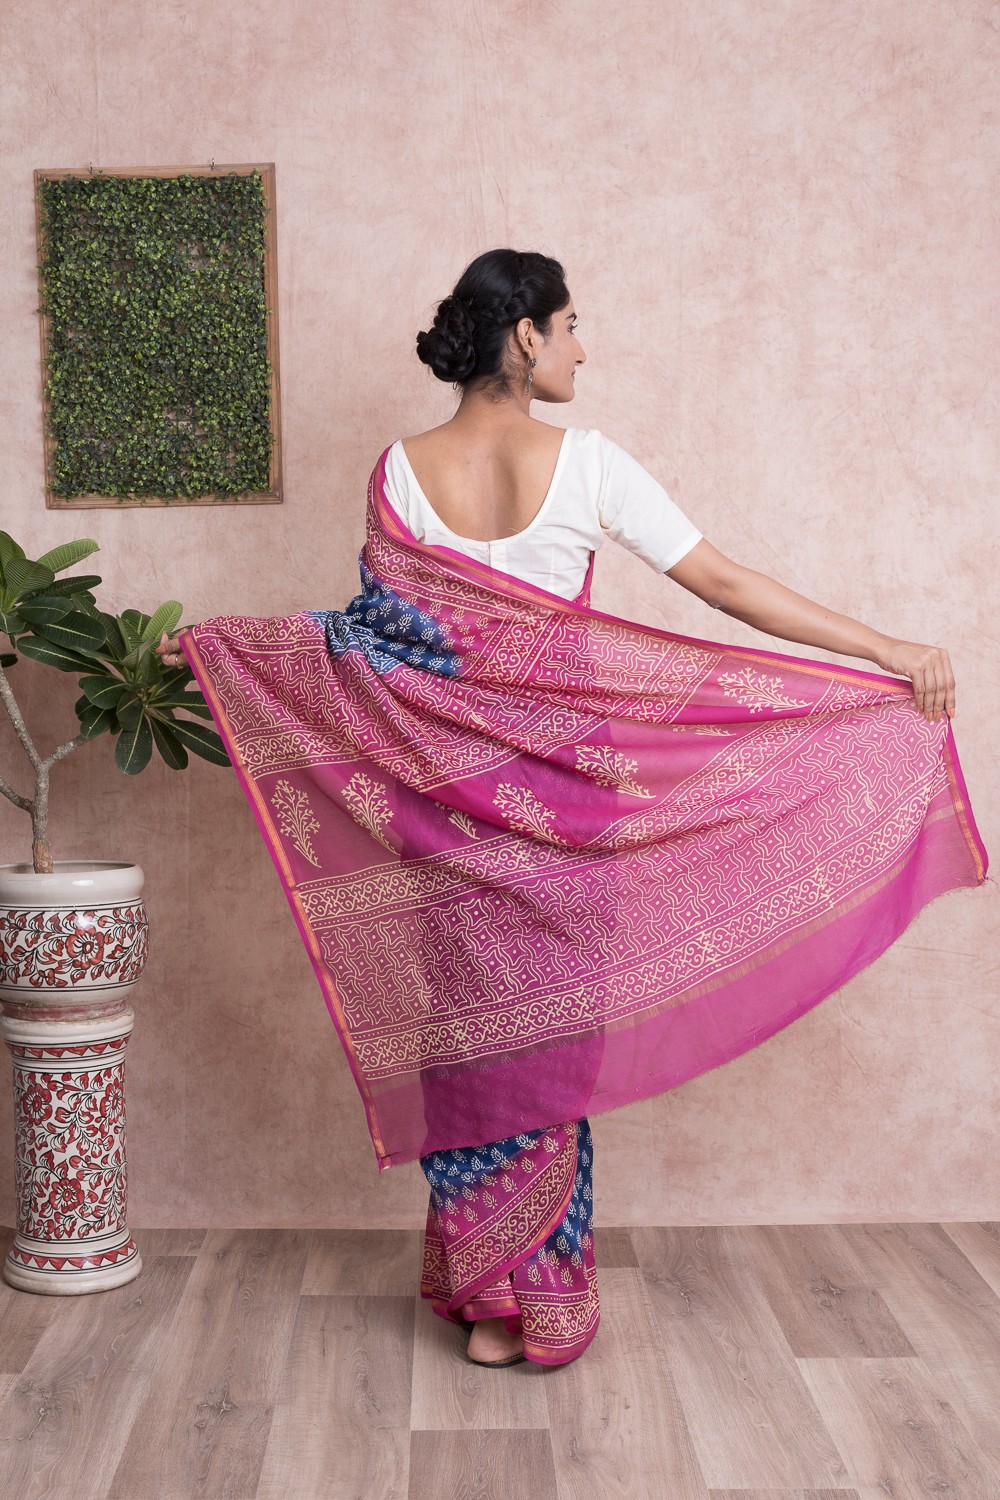 Booti Pattern Chanderi Silk Saree with Unstitched Blouse - Blue And Pink